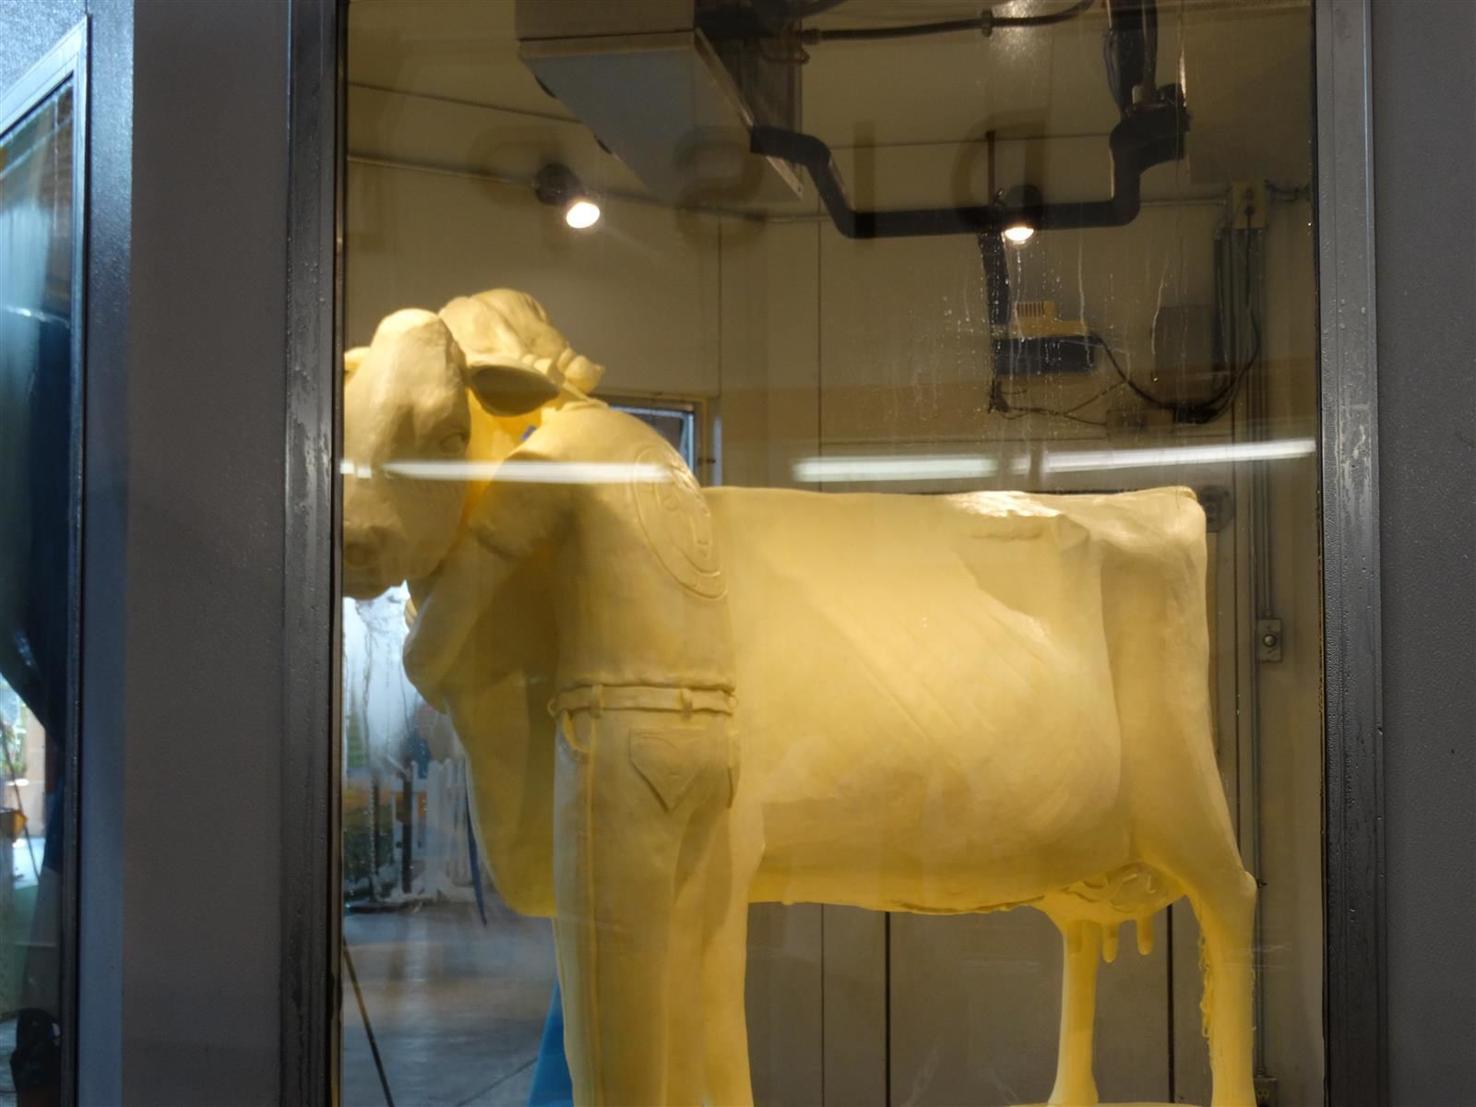 Illinois State Fair butter cow unveiled